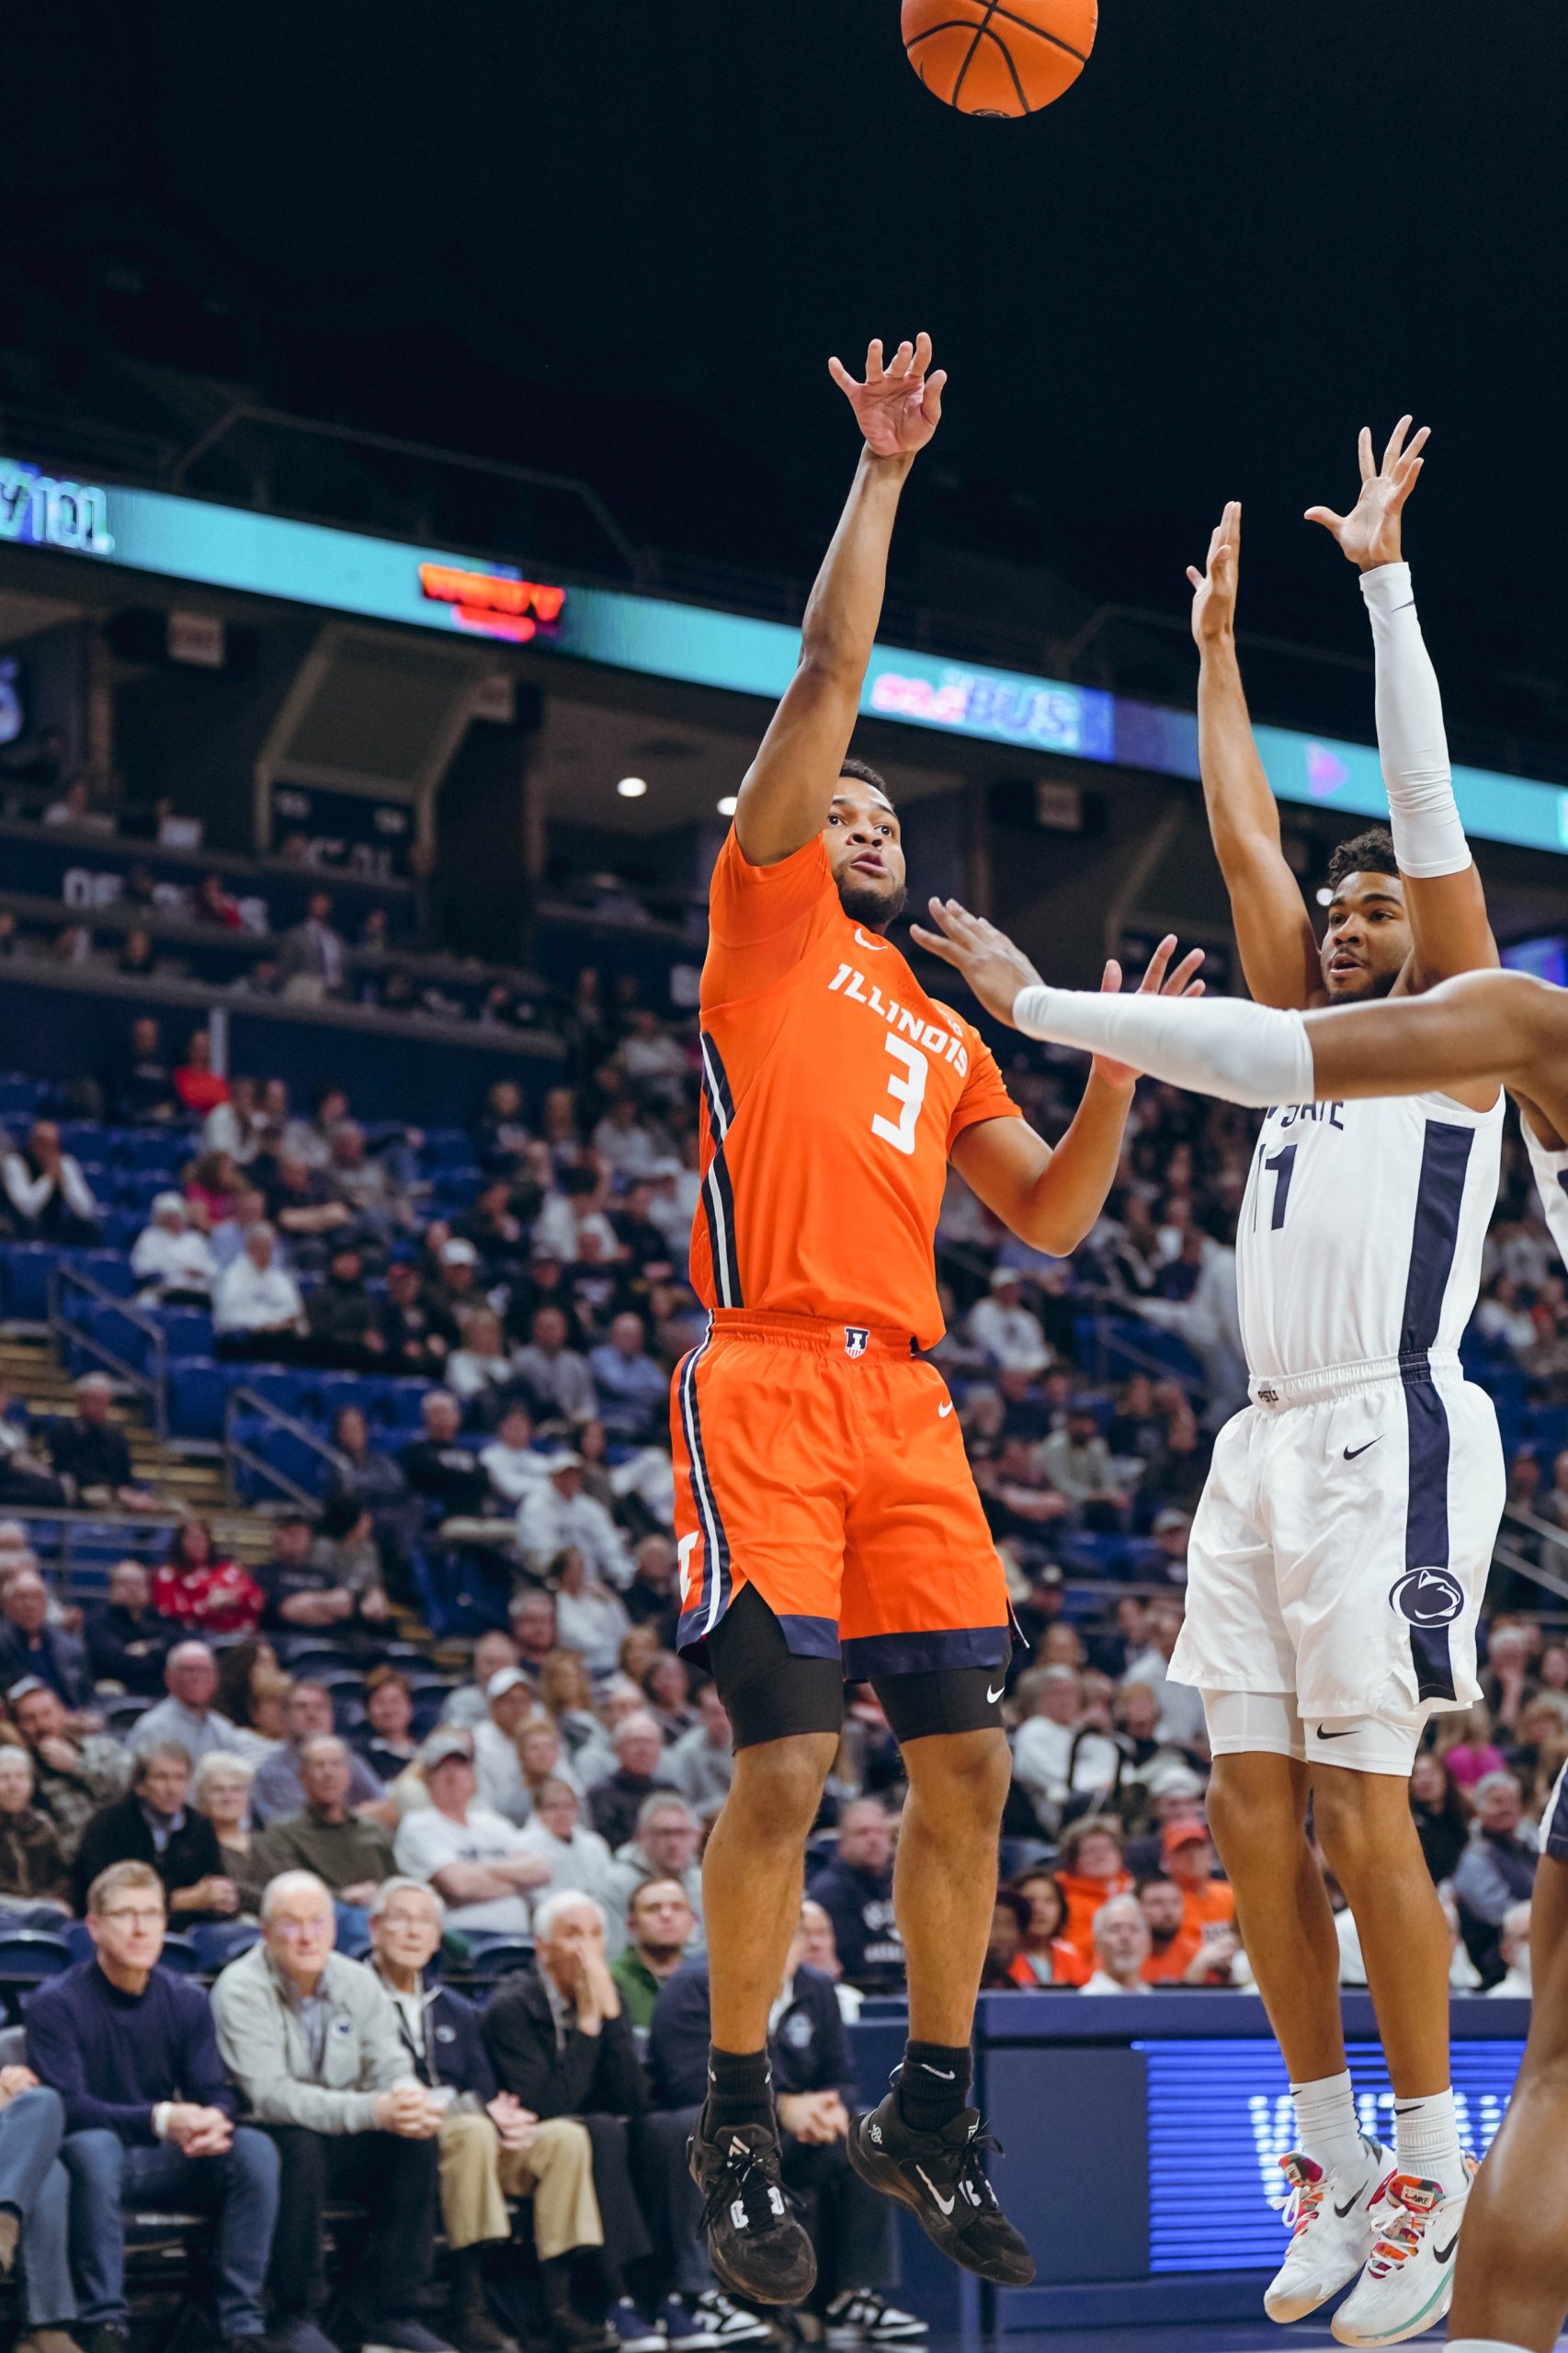 Heat Checks and Hail Marys - Penn State Upsets the Illini Again (Last Night was a Sequel No Illini Fan Wanted to Watch)